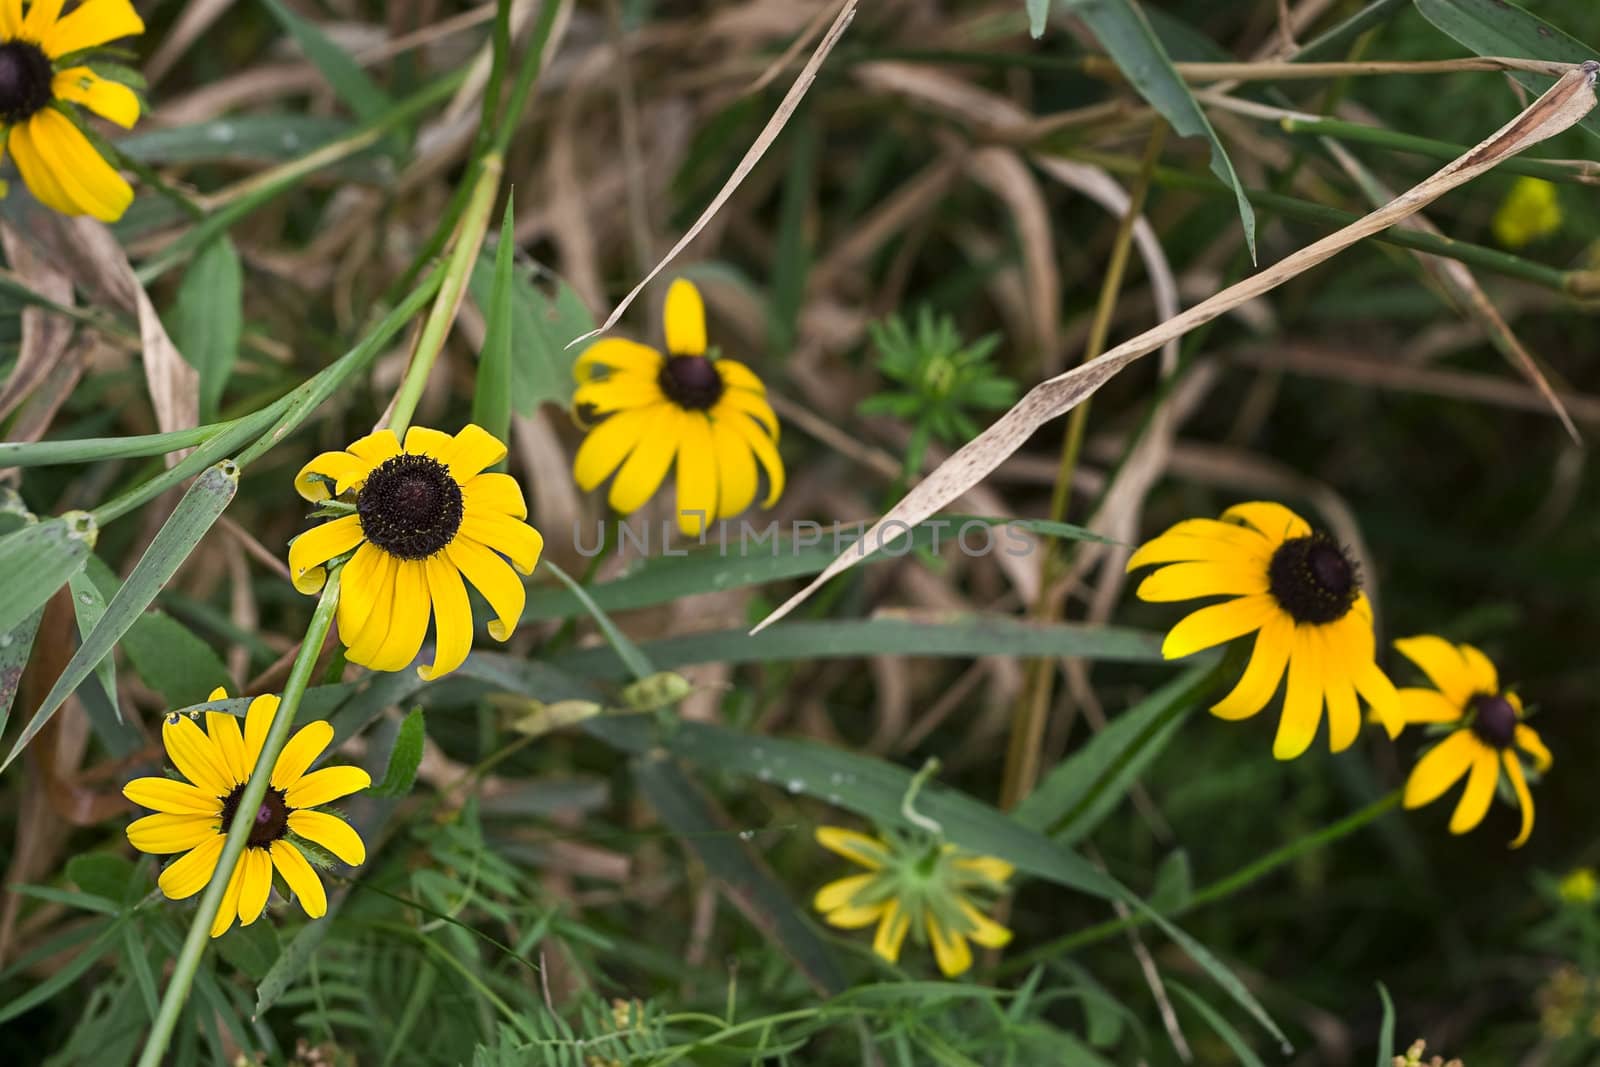 yellow daisys growing in the wild